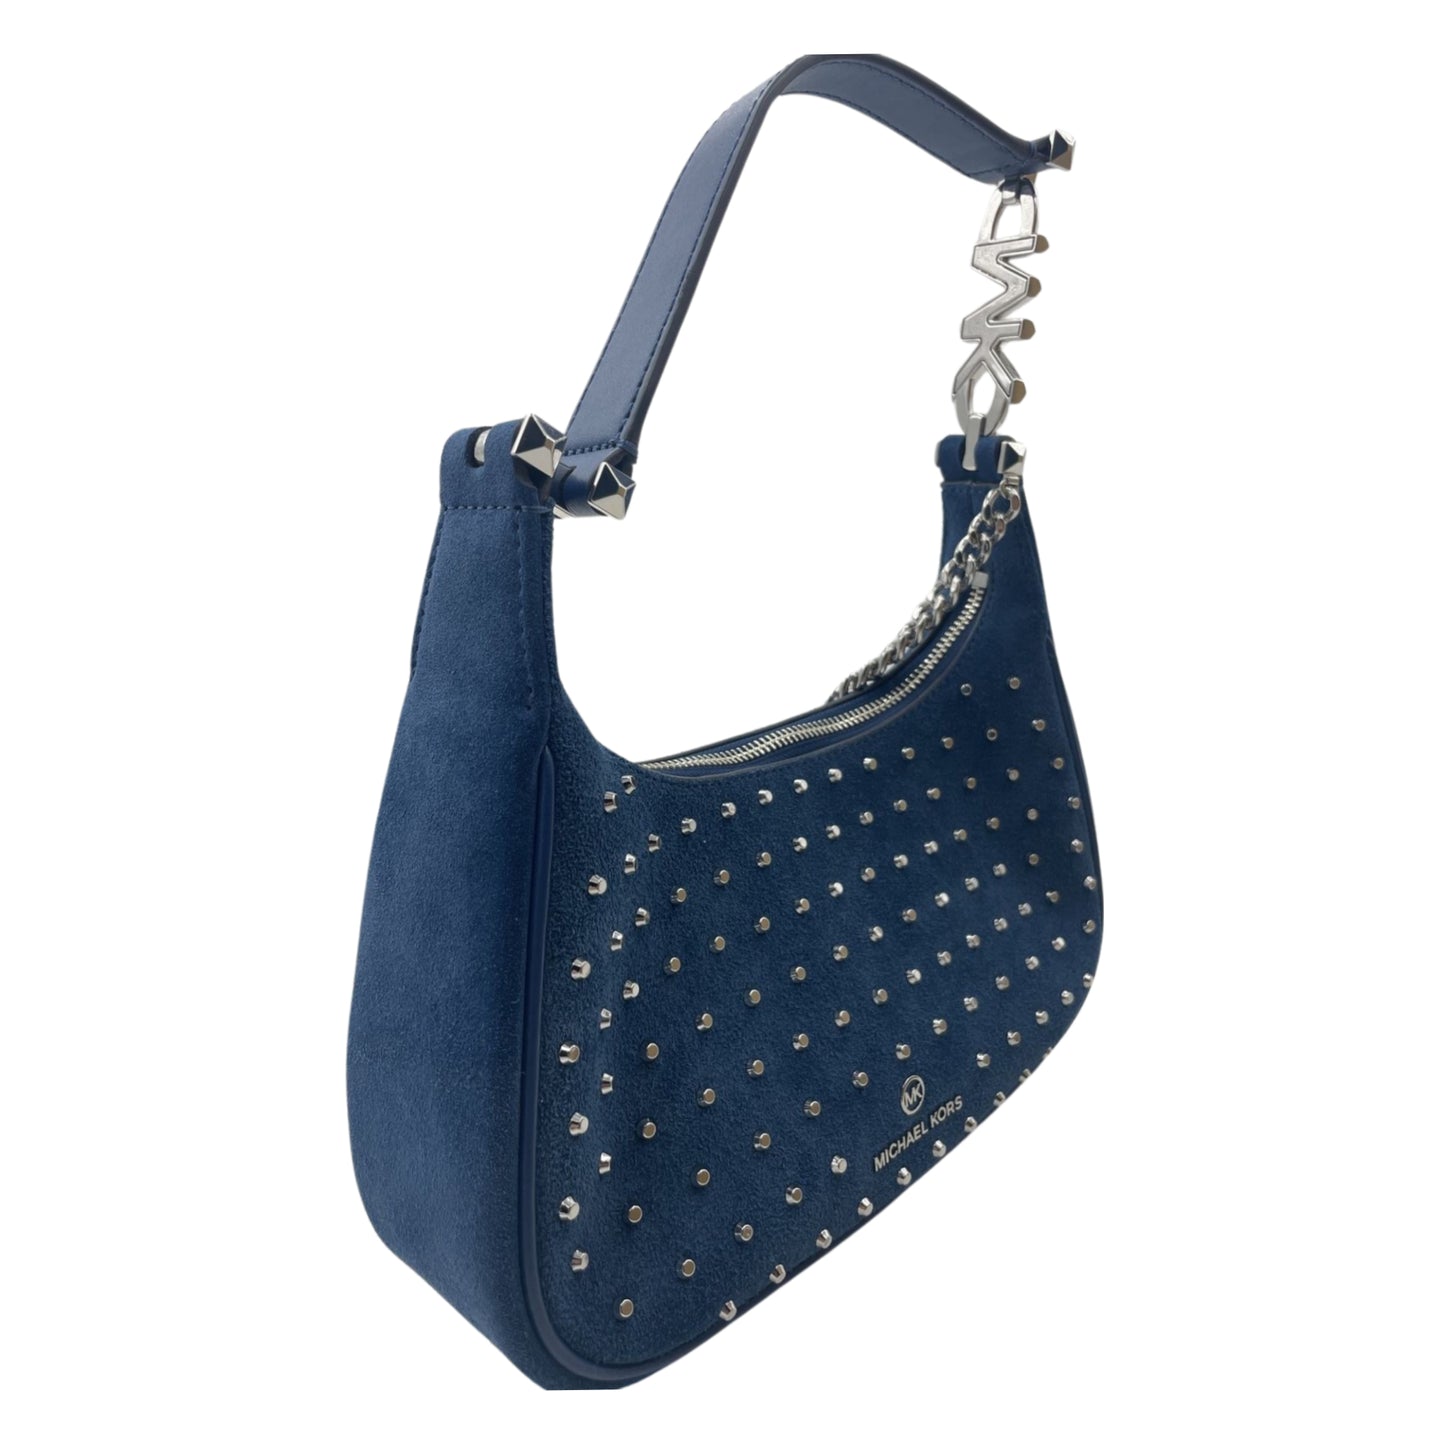 Michael Kors Piper Small Studded Leather Pouchette - River Blue